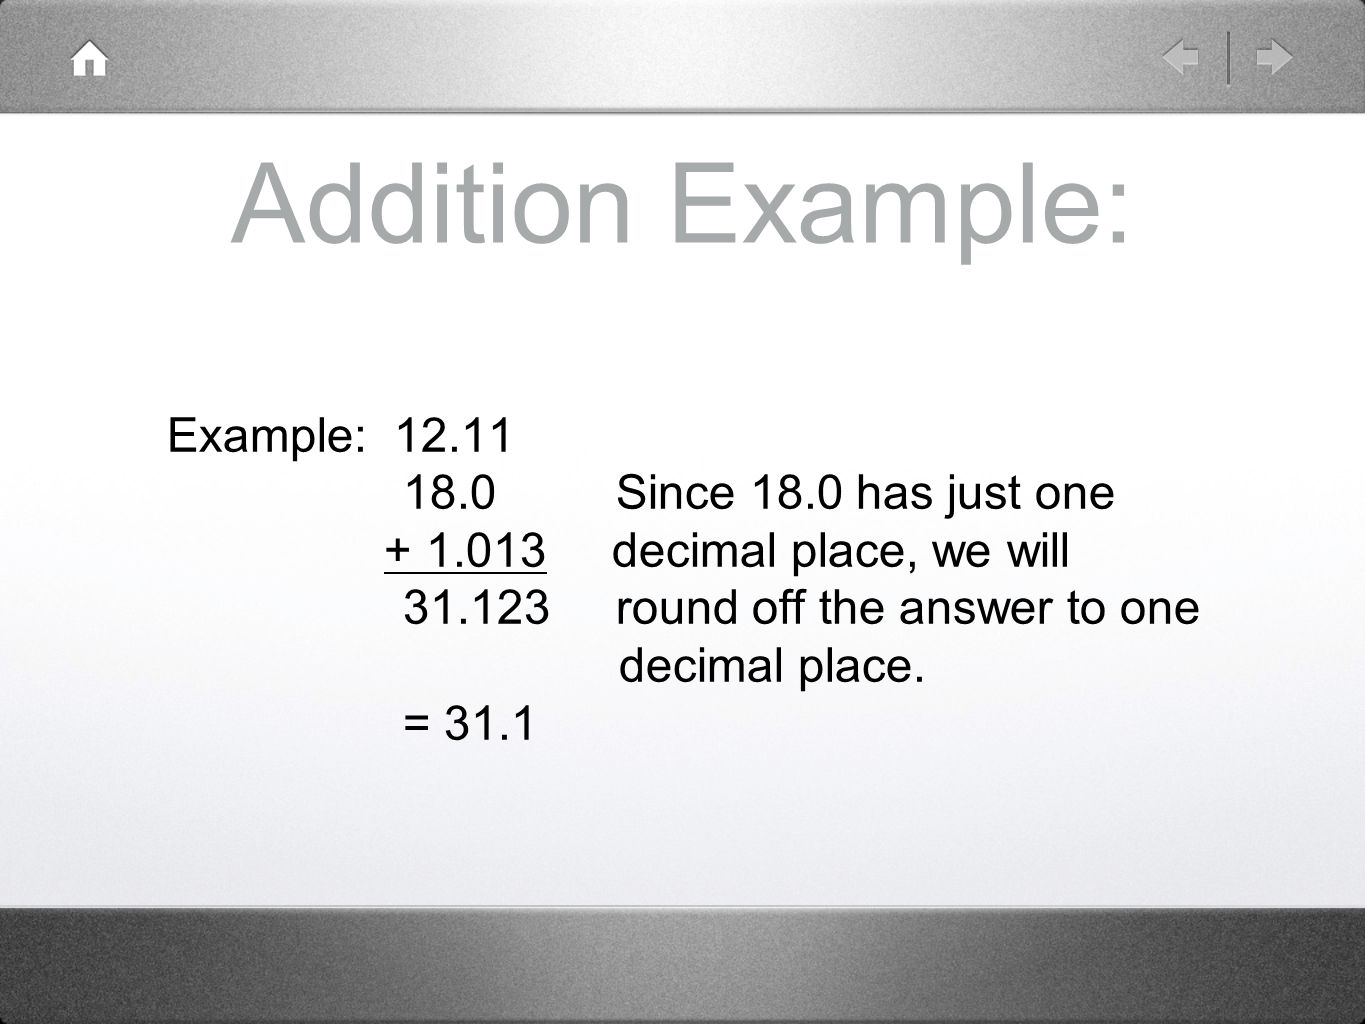 Addition Example: